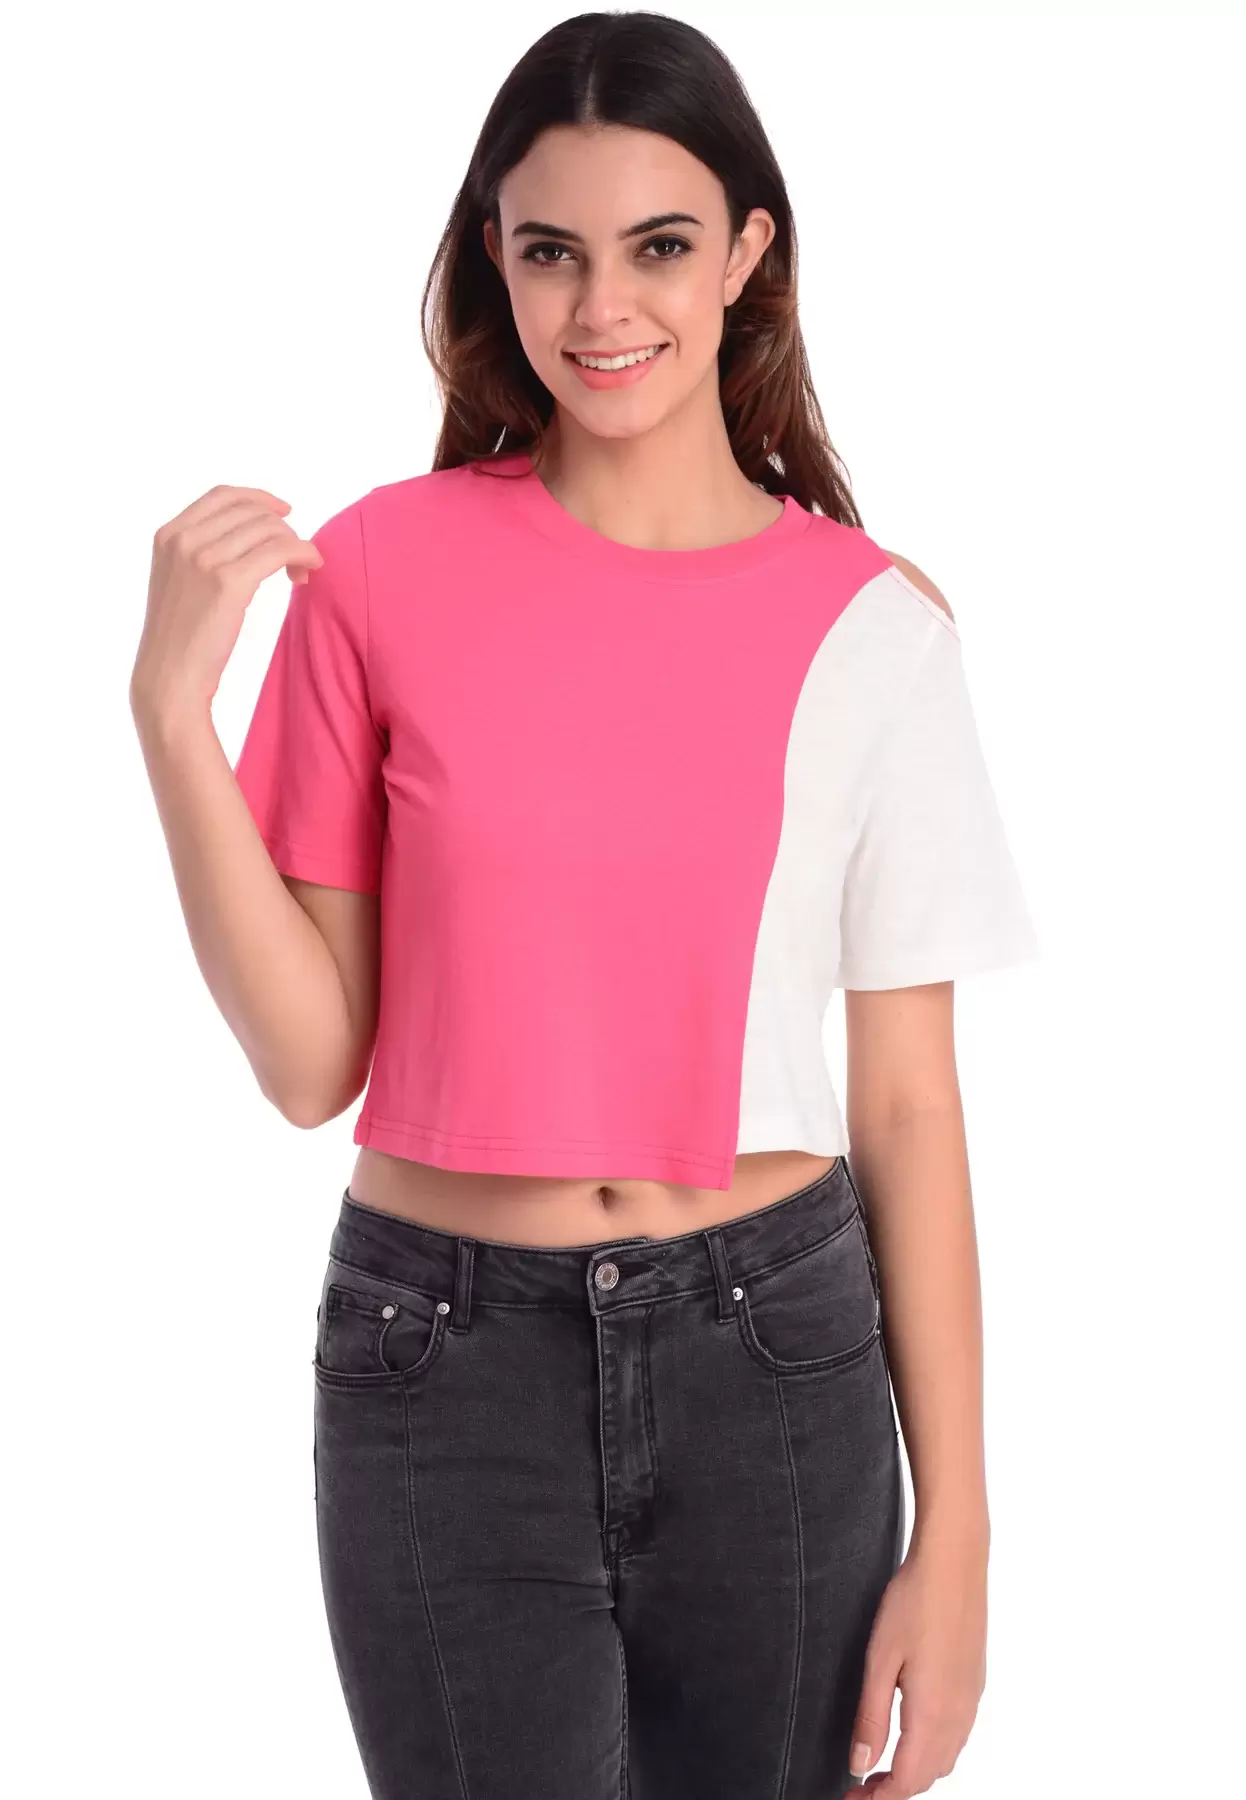 HOT PINK N WHITE COLOUR BLOCK TOP